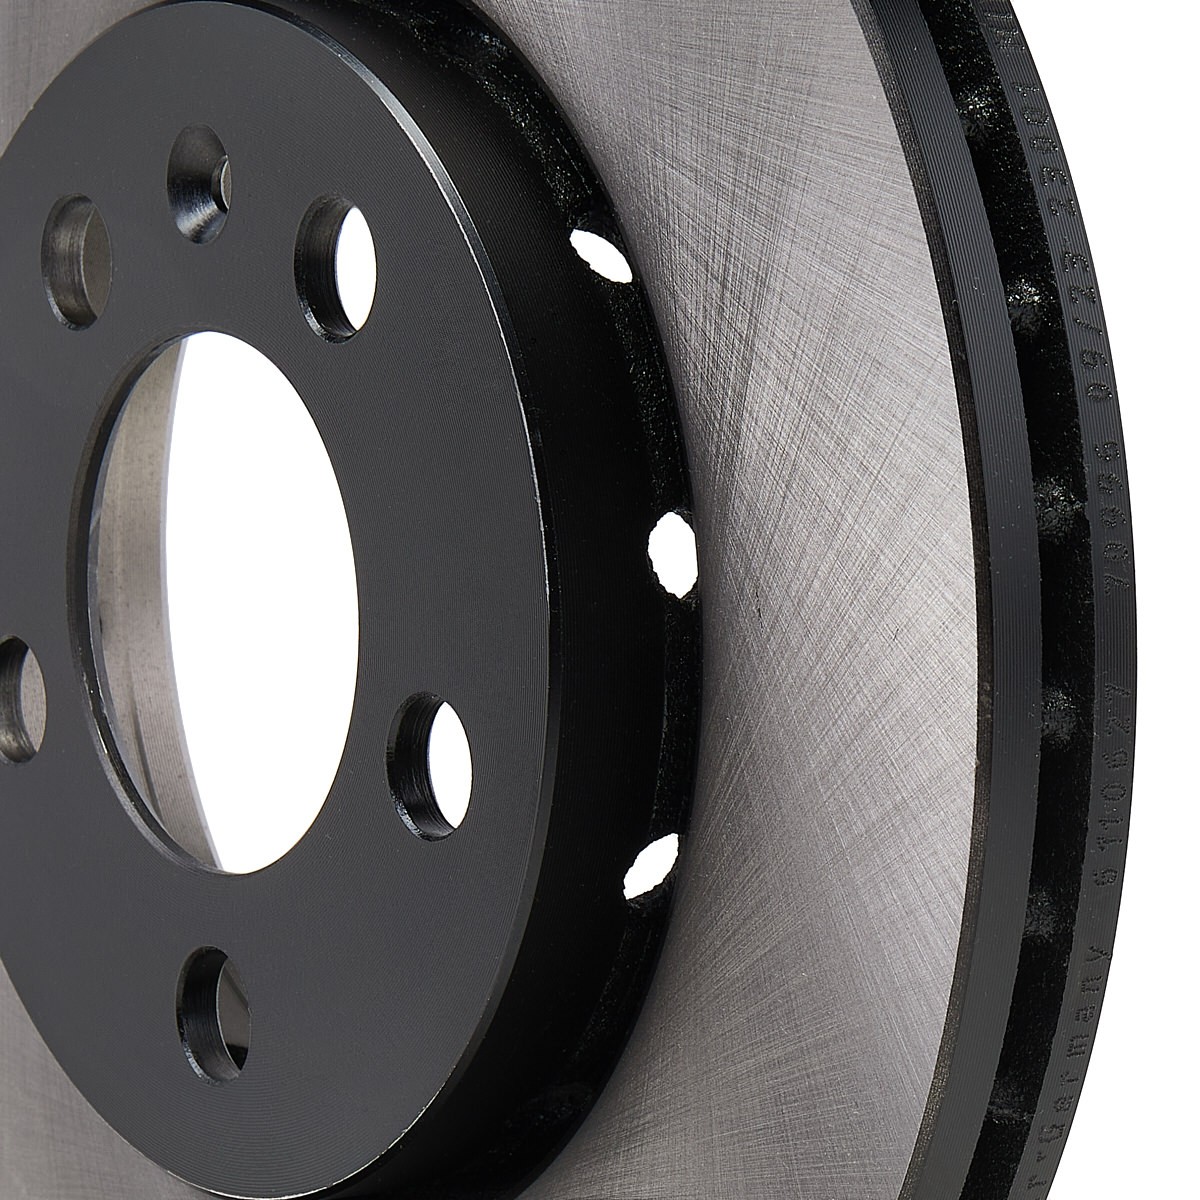 6110627 Brake discs 6110627 METZGER Front Axle, 256x22mm, 5x100, internally vented, Painted, Cross-hatch, High-carbon